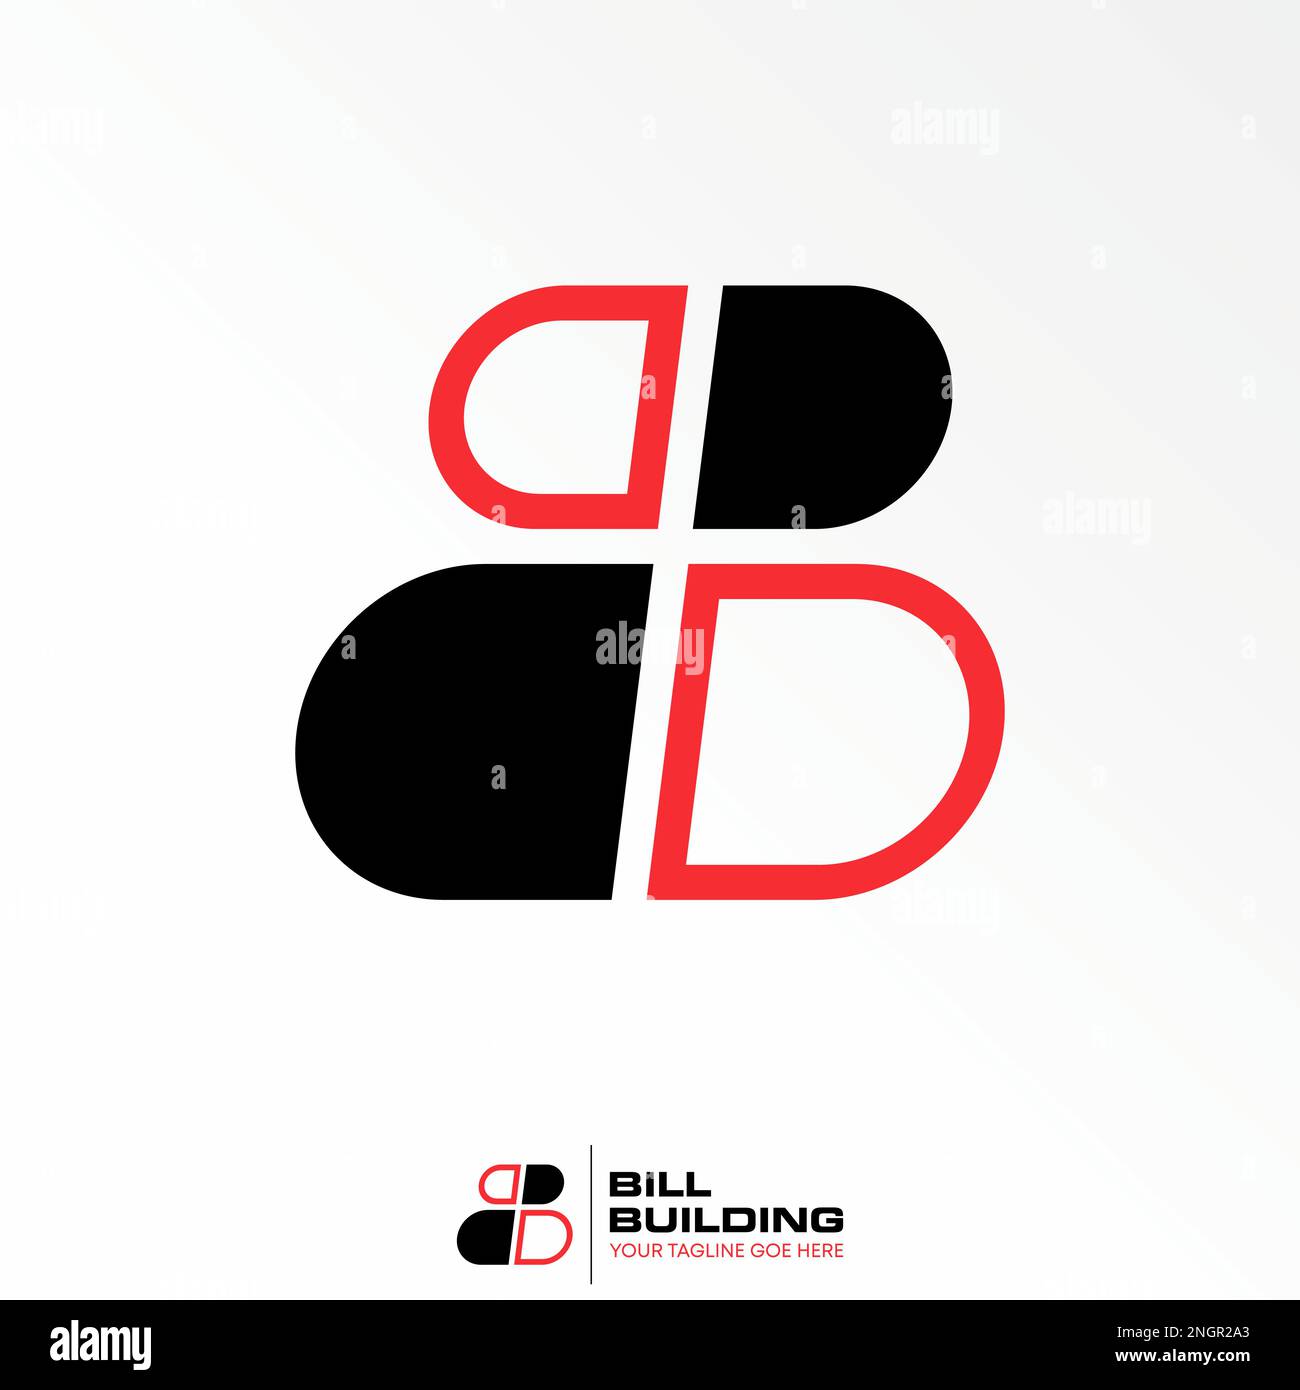 big and small half ellipse on top and down like letter B font image graphic icon logo design abstract concept vector stock initial or monogram Stock Vector